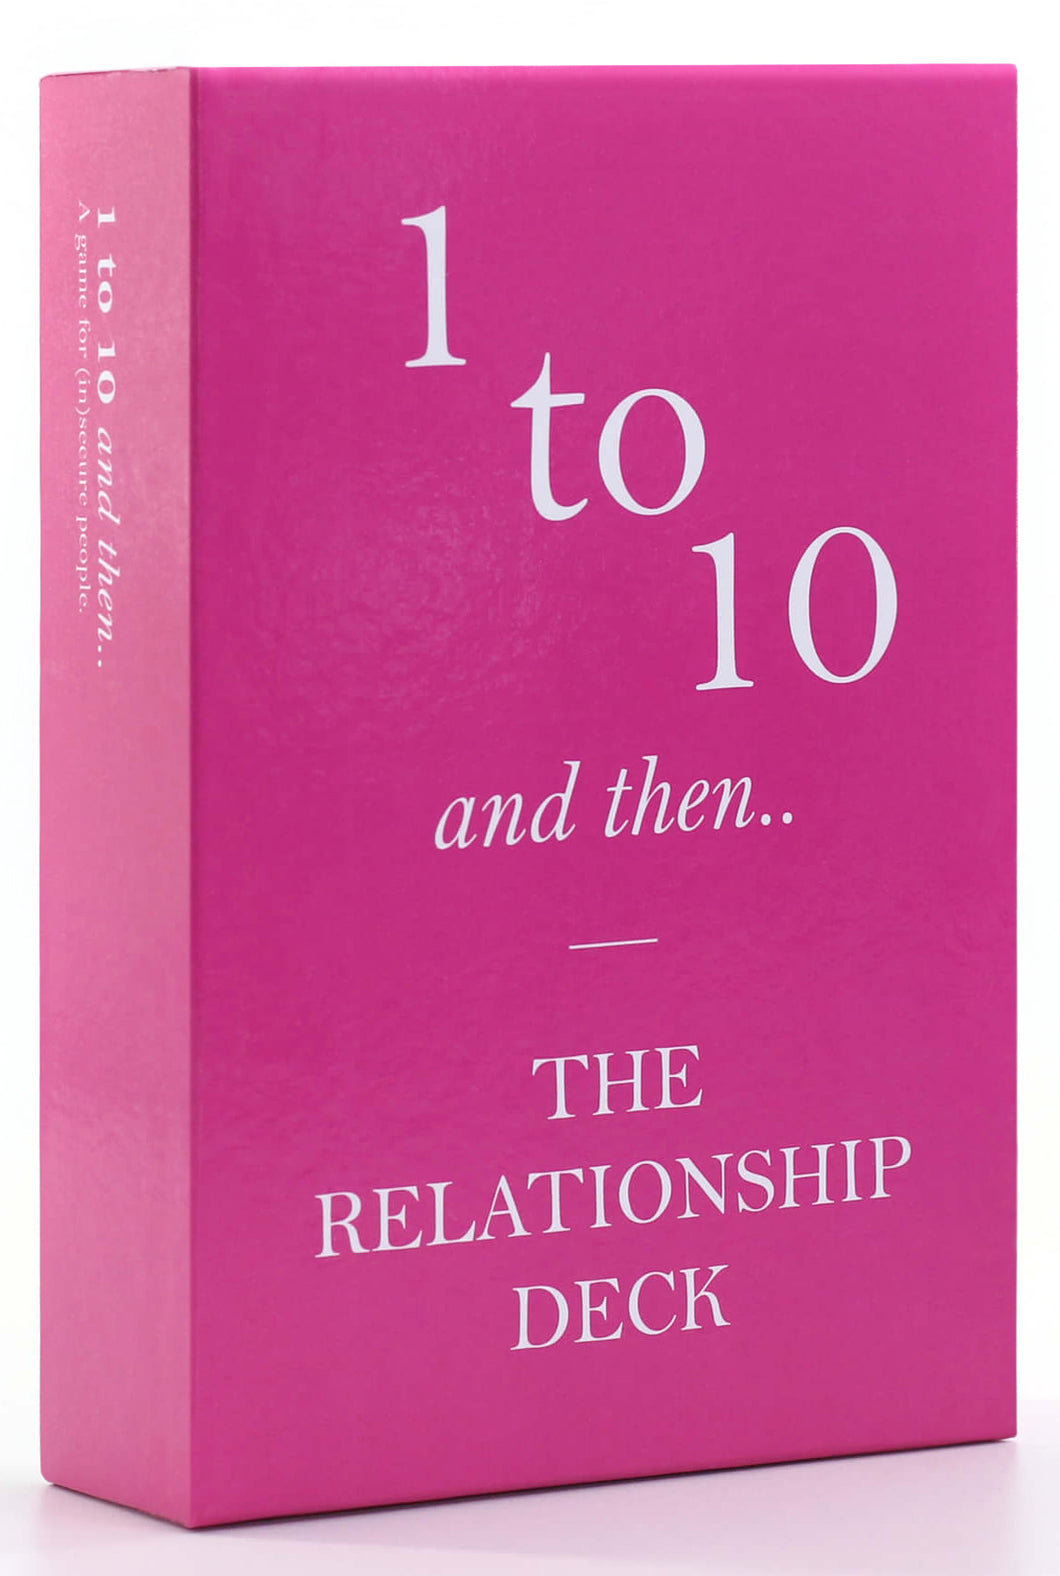 The Relationship Deck